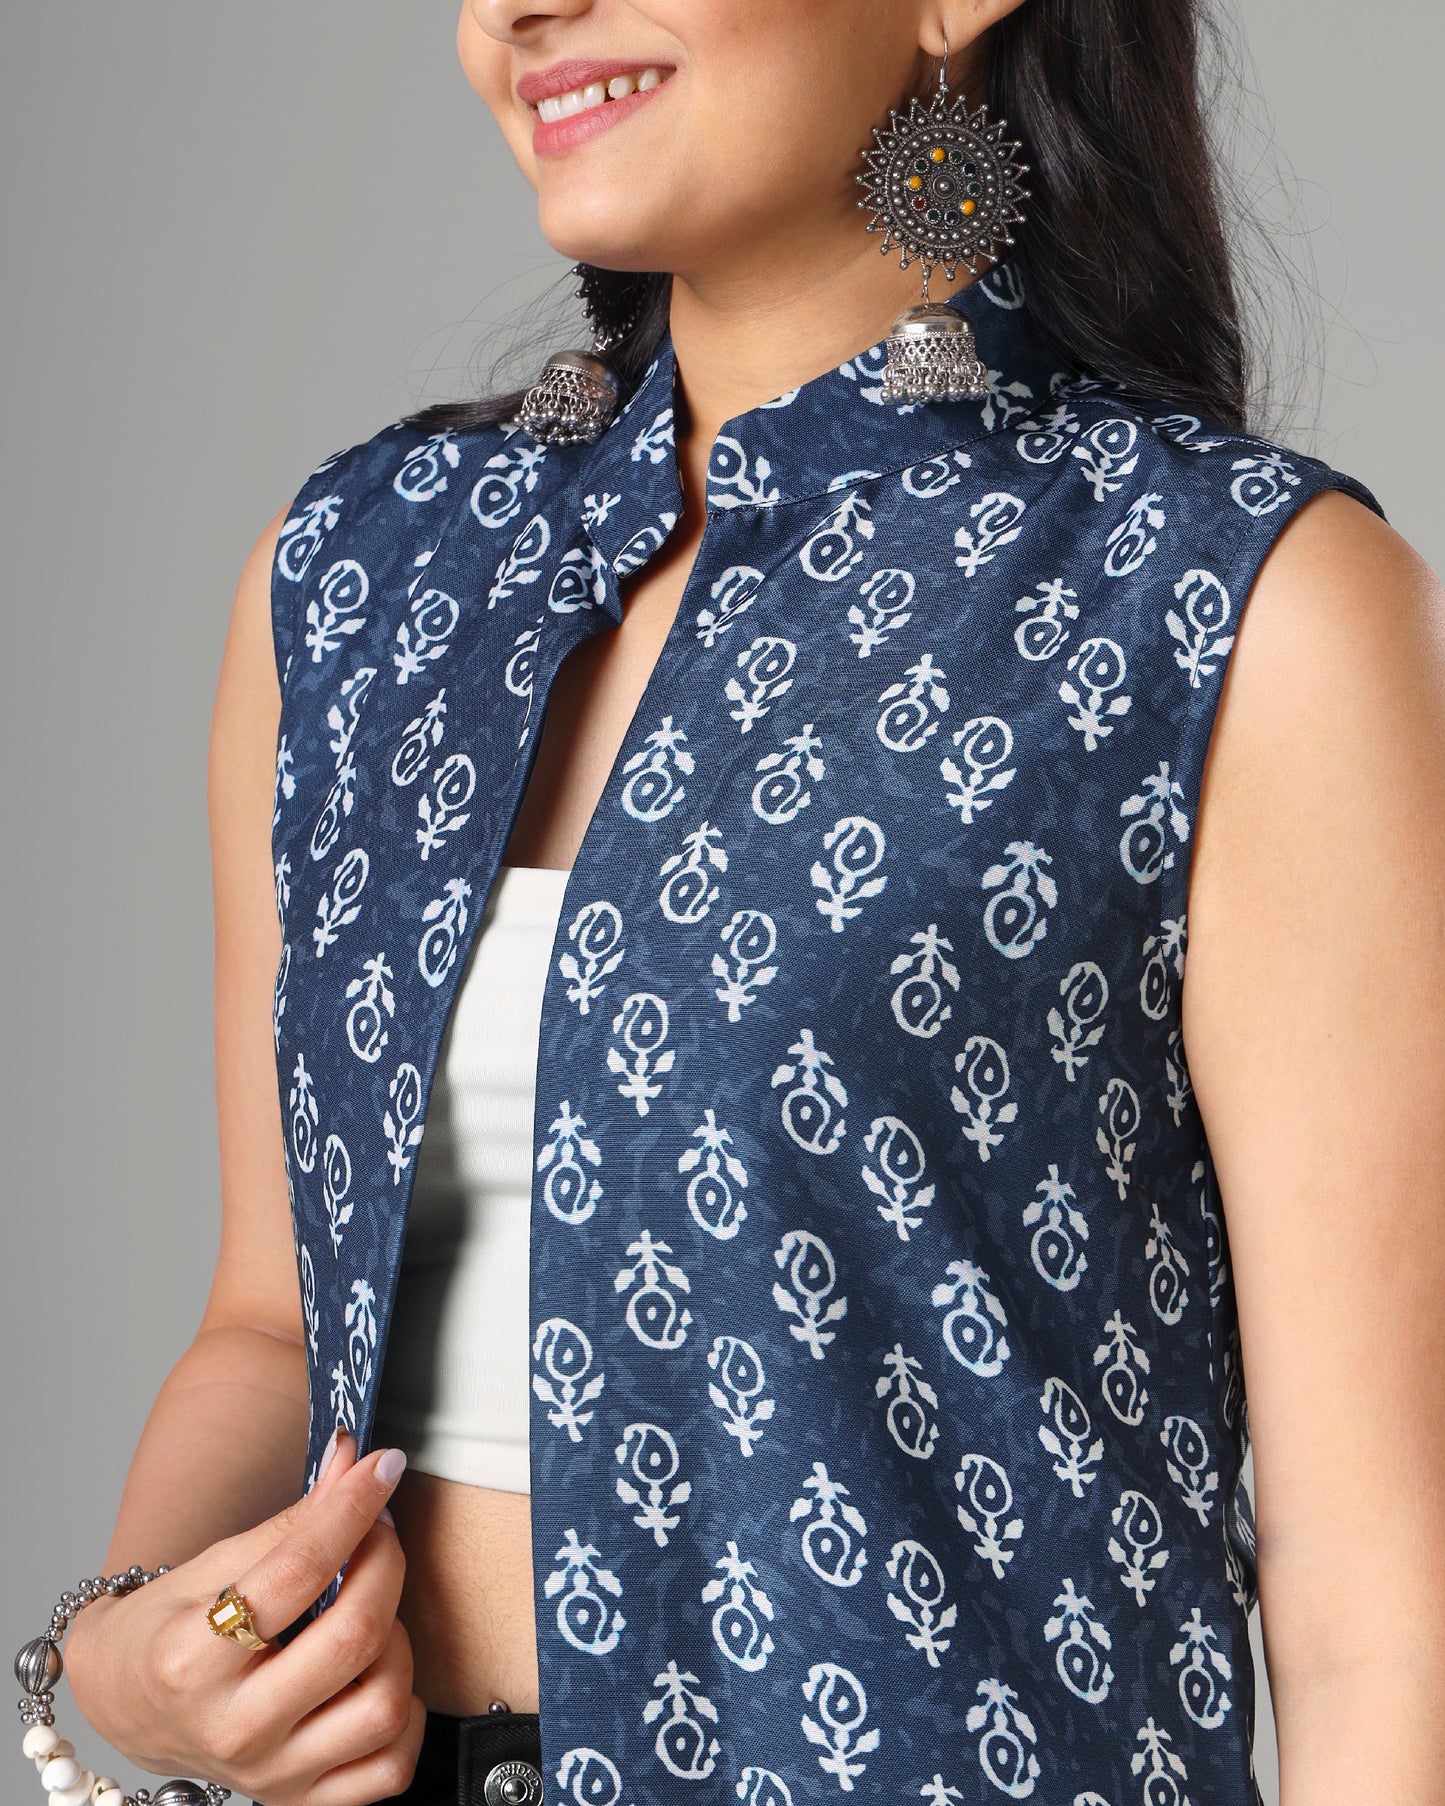 Trendy Quirky Indigo Long Jacket For Woman